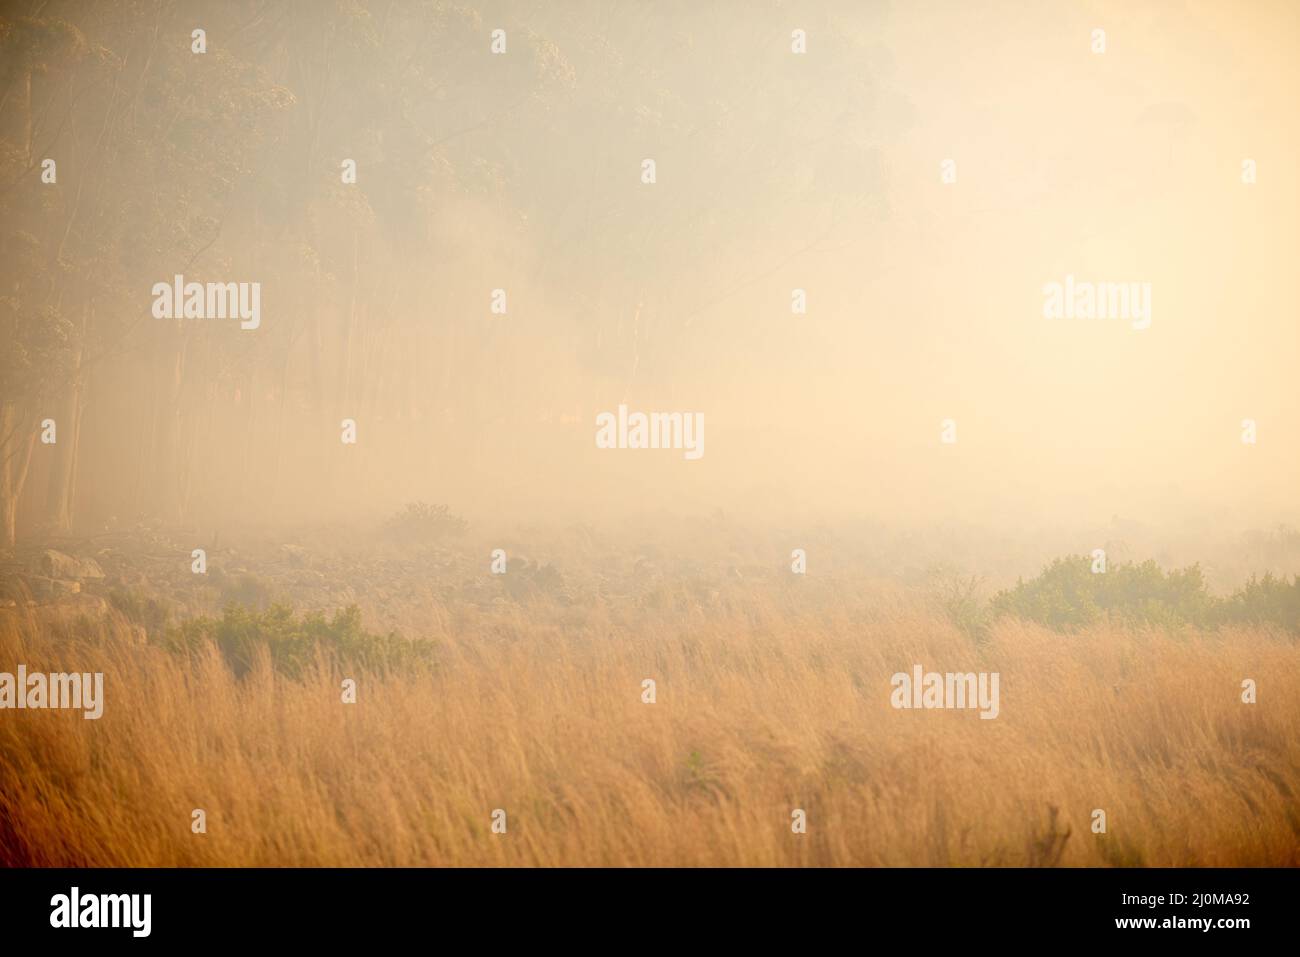 Where theres smoke, theres fire. Shot of a wild fire burning in the distance. Stock Photo